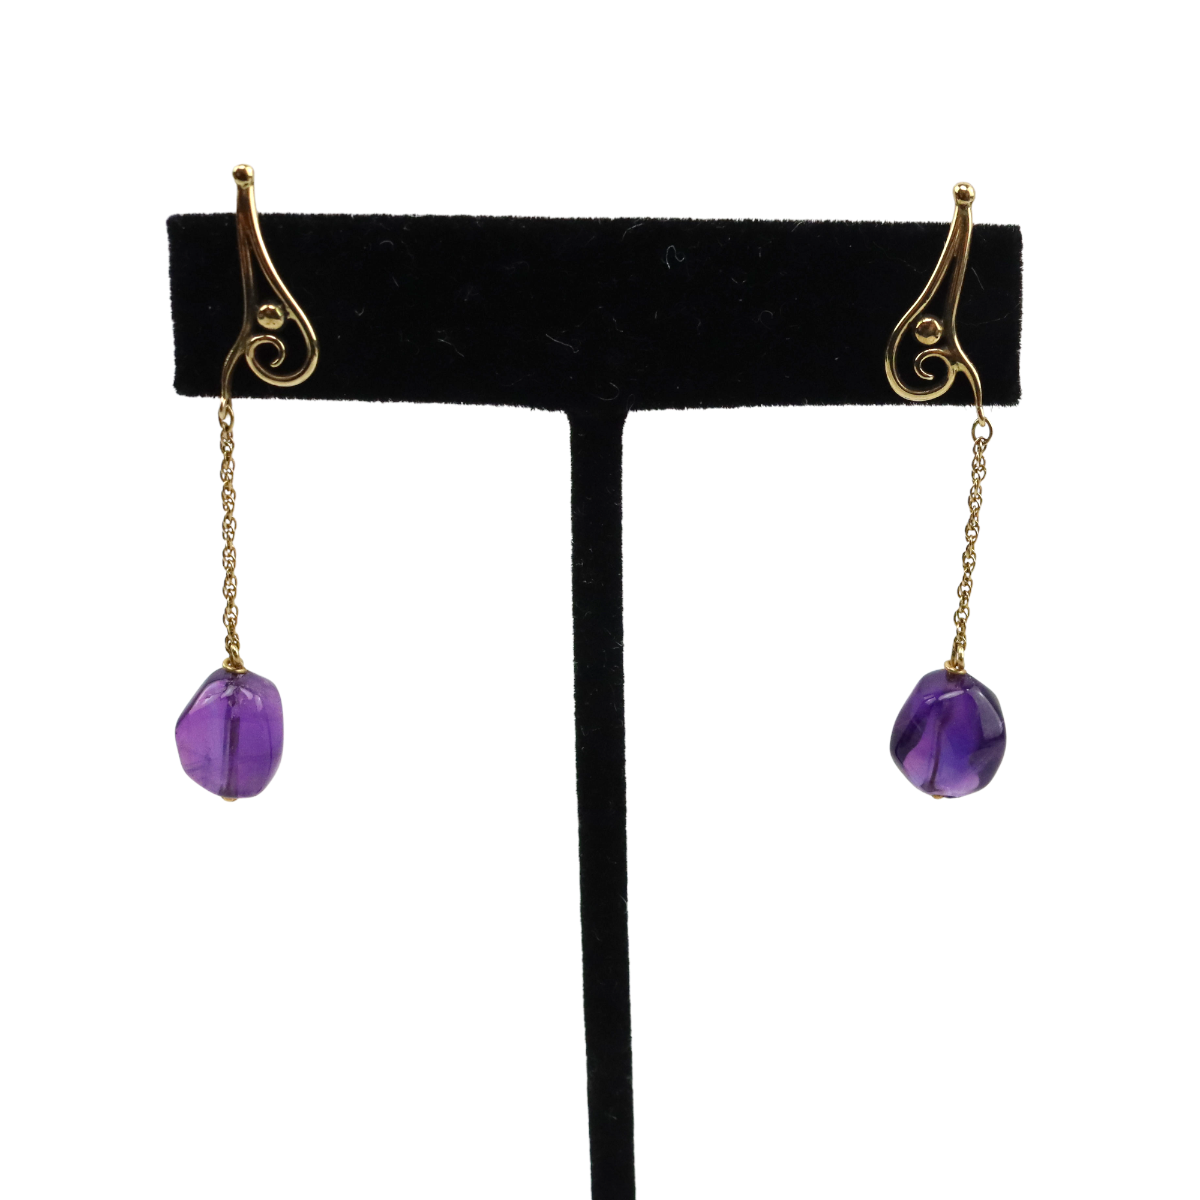 Frank Patania Jr. - Amethyst and 14K Gold Necklace, 13" length (J91699-1222-016) 1